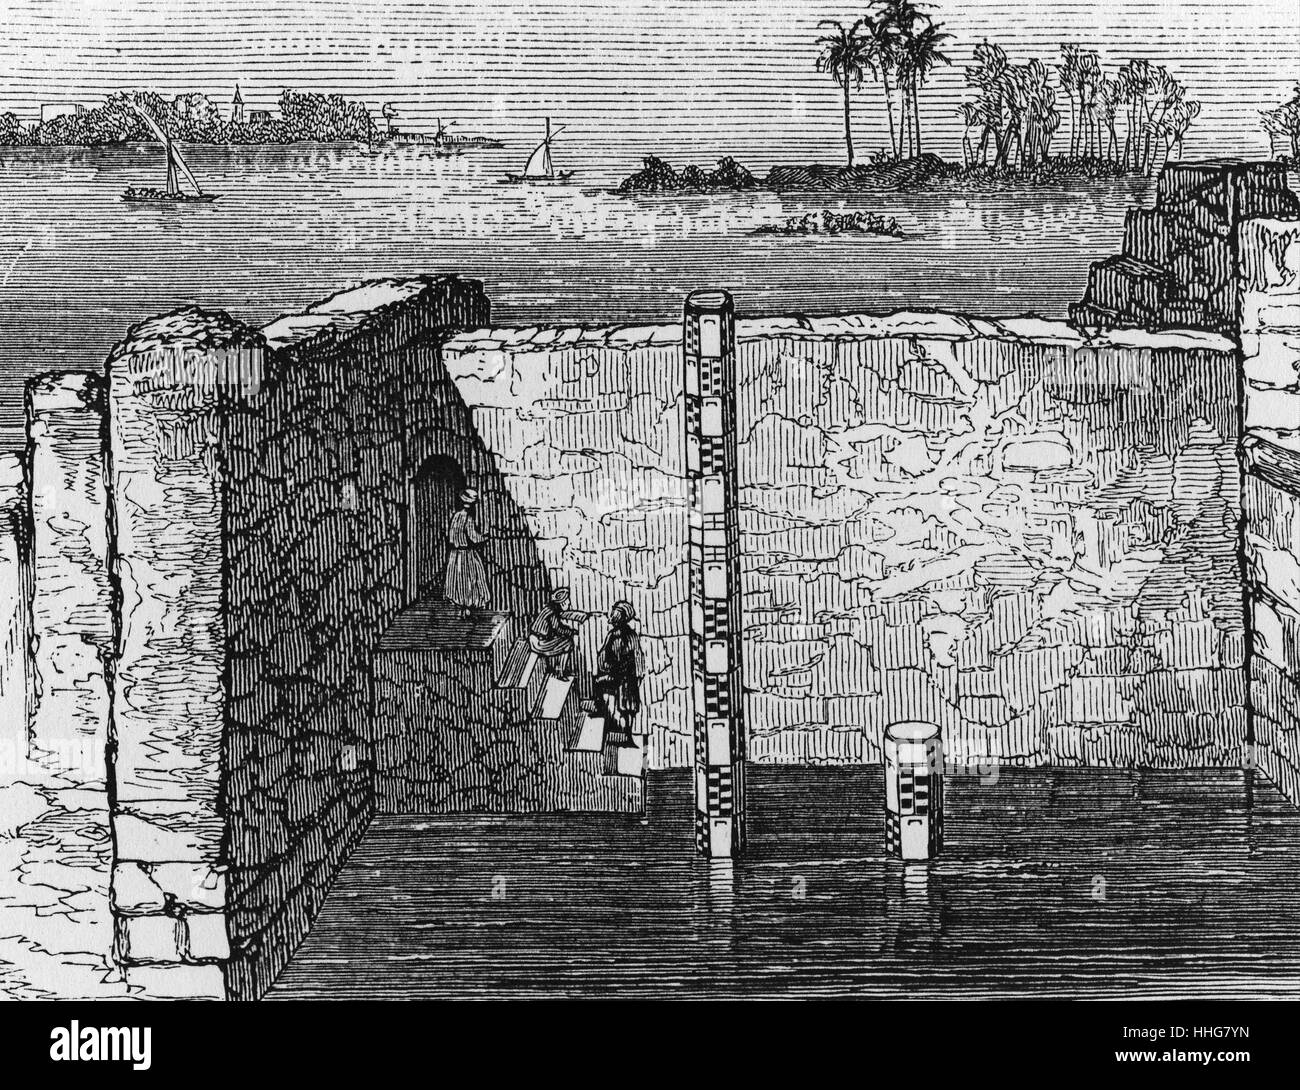 Nilometer. Remains of an ancient device for measuring the annual inundation of the Nile. The annual flooding of the river 'was vitally important to Egypt because it governed the fertility of the soil and could mean the difference between an abundance and starvation. Illustration published Paris; circa 1885 Stock Photo